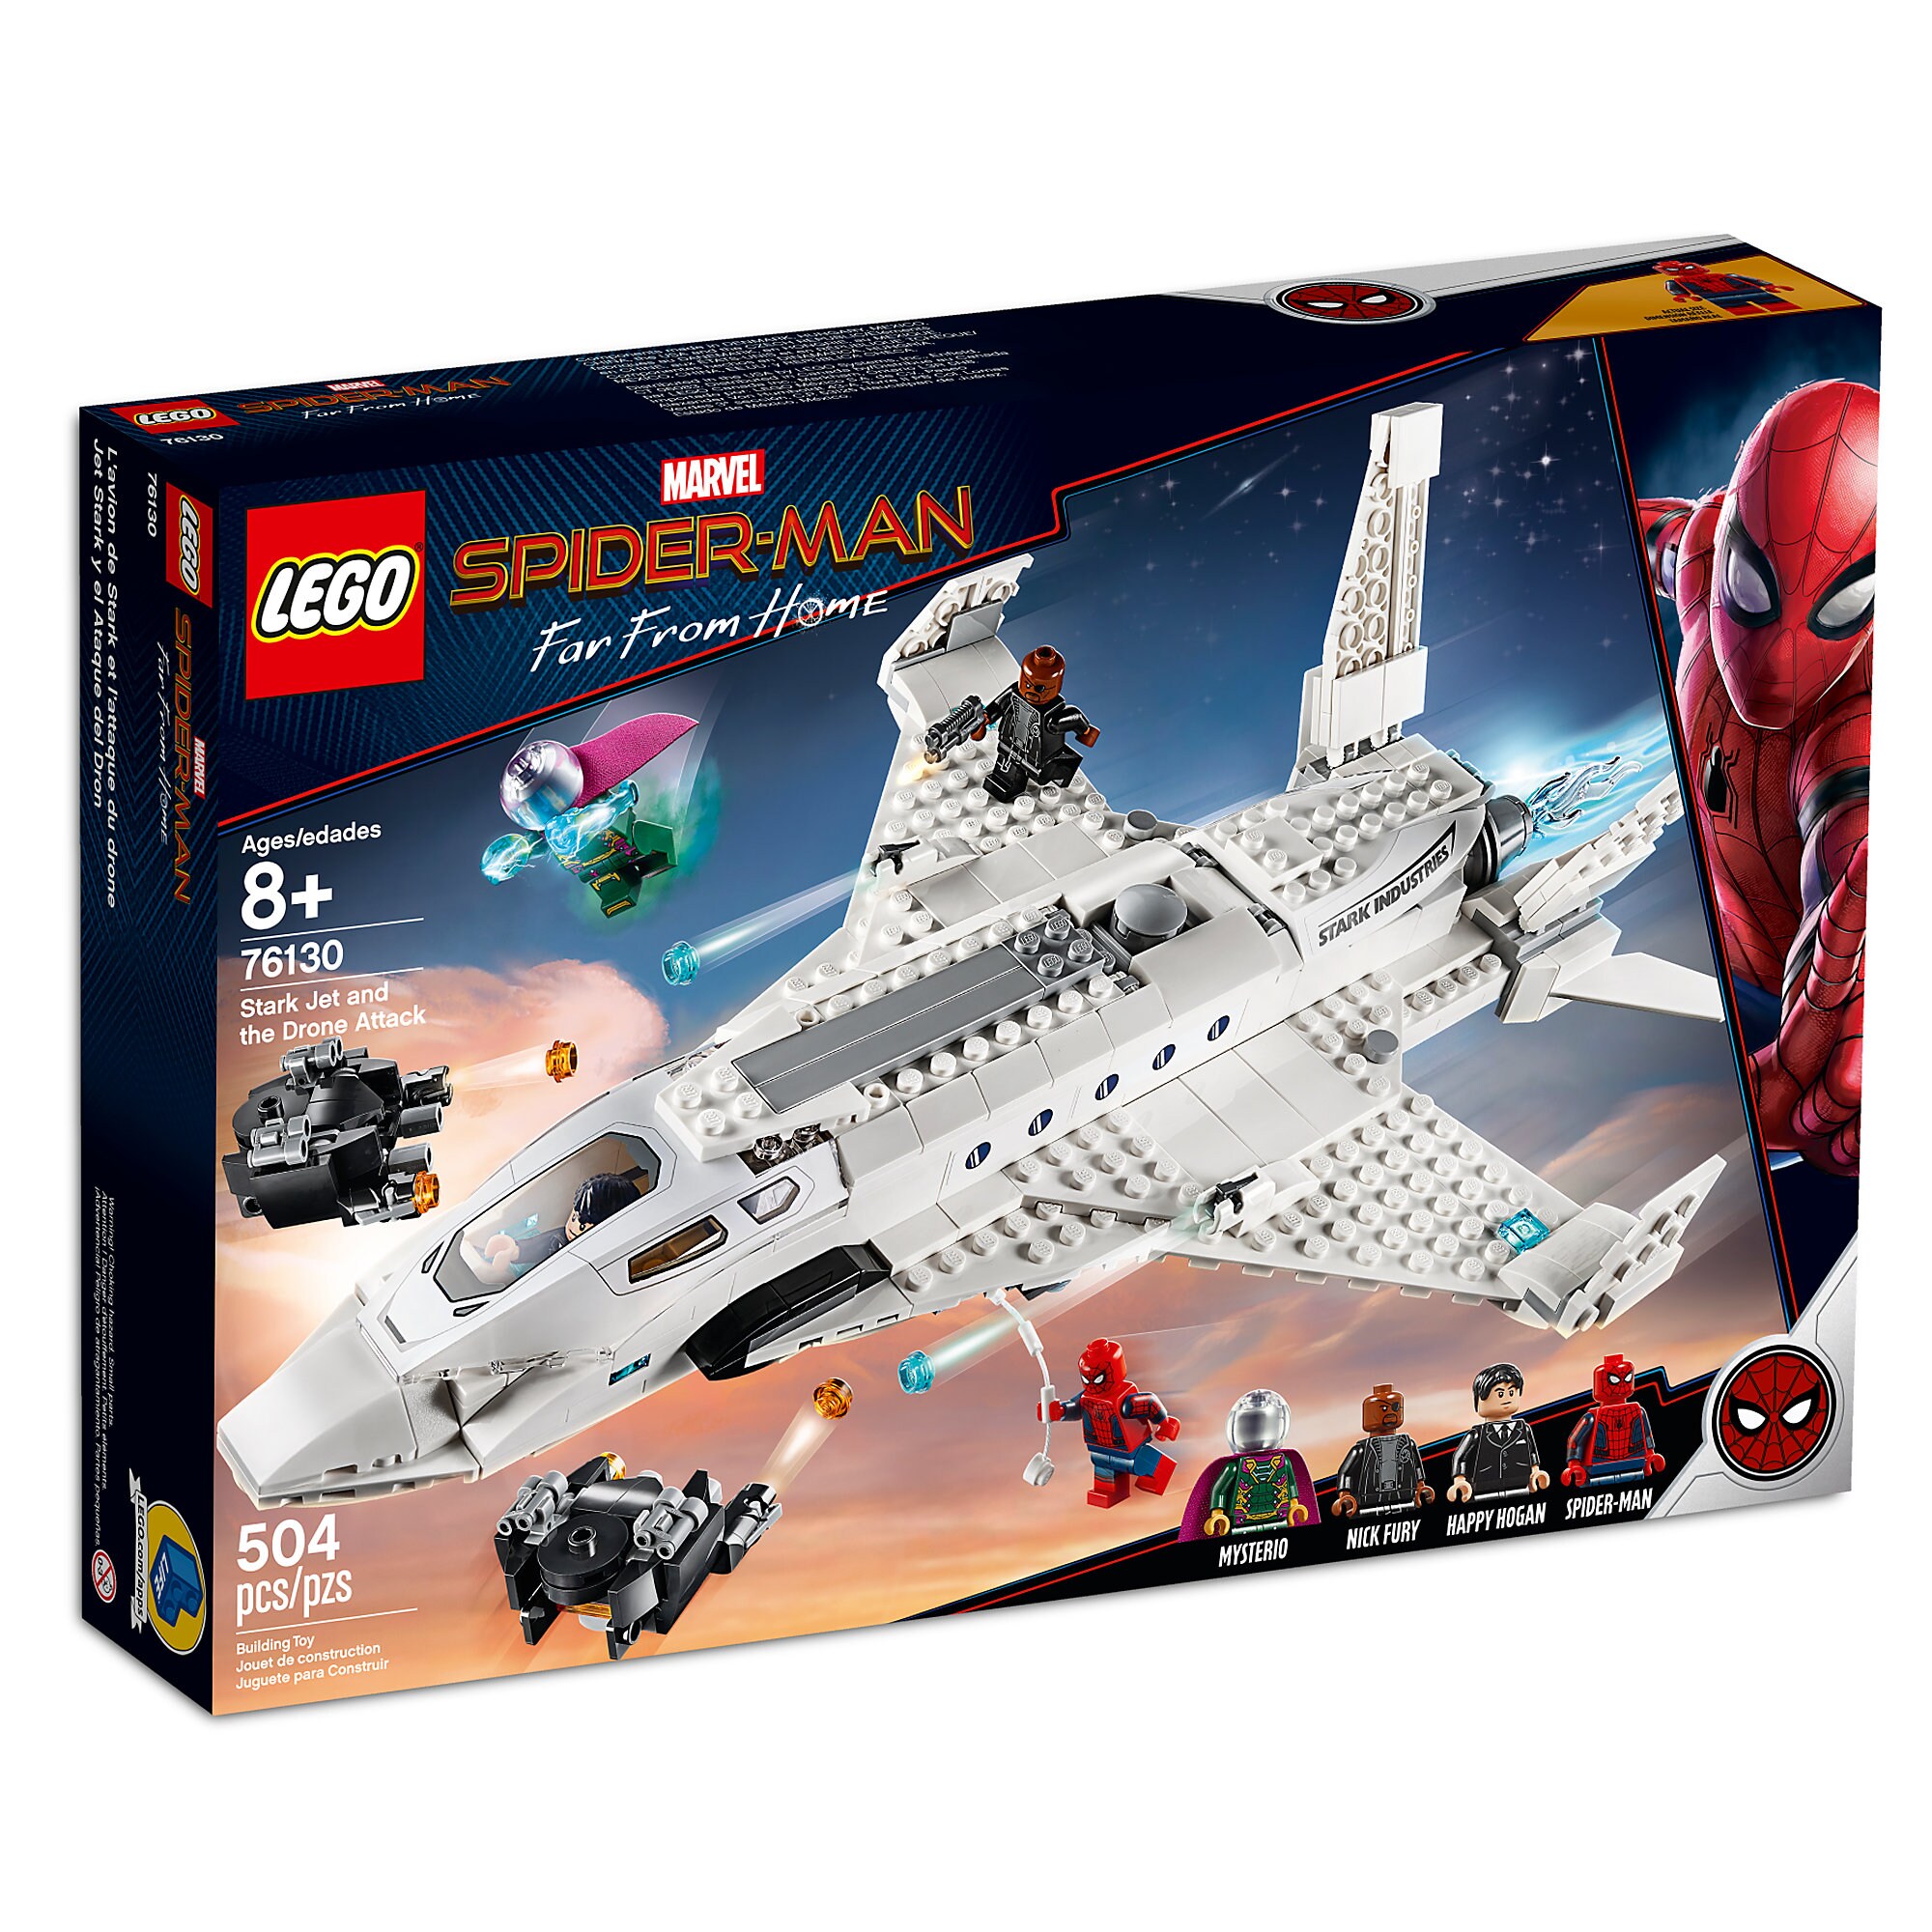 Spider-Man: Far From Home Stark Jet and the Drone Attack Play Set by LEGO